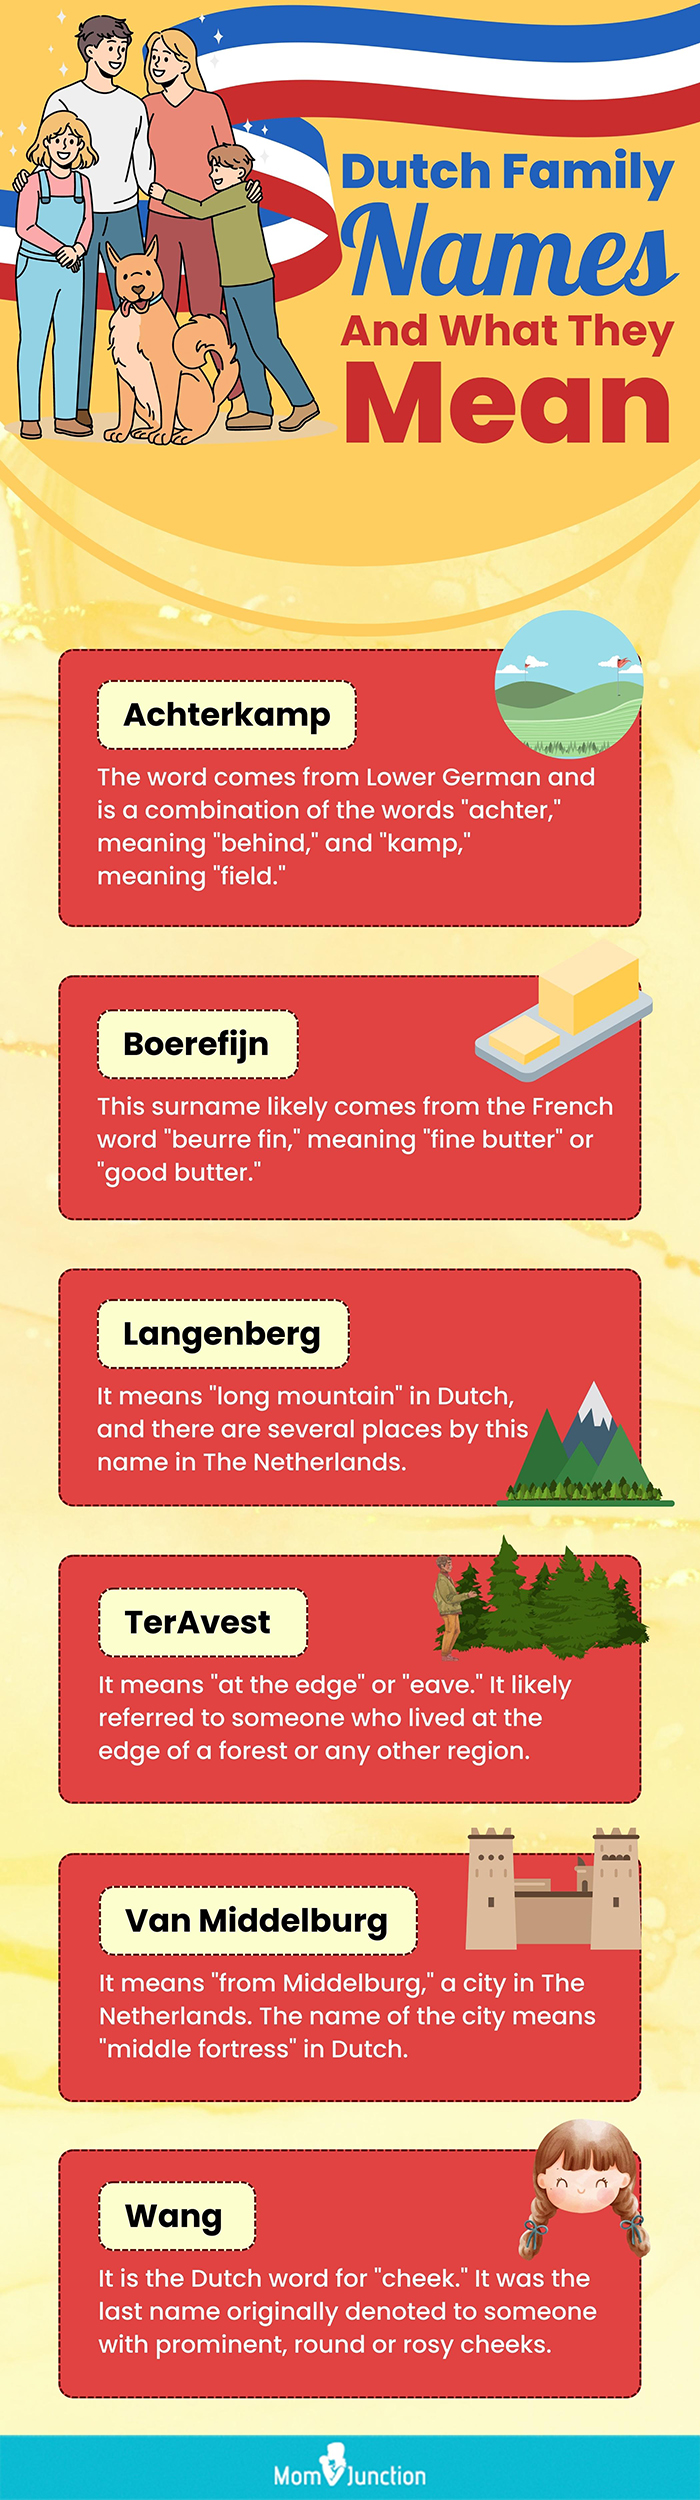 dutch family names and what they mean (infographic)